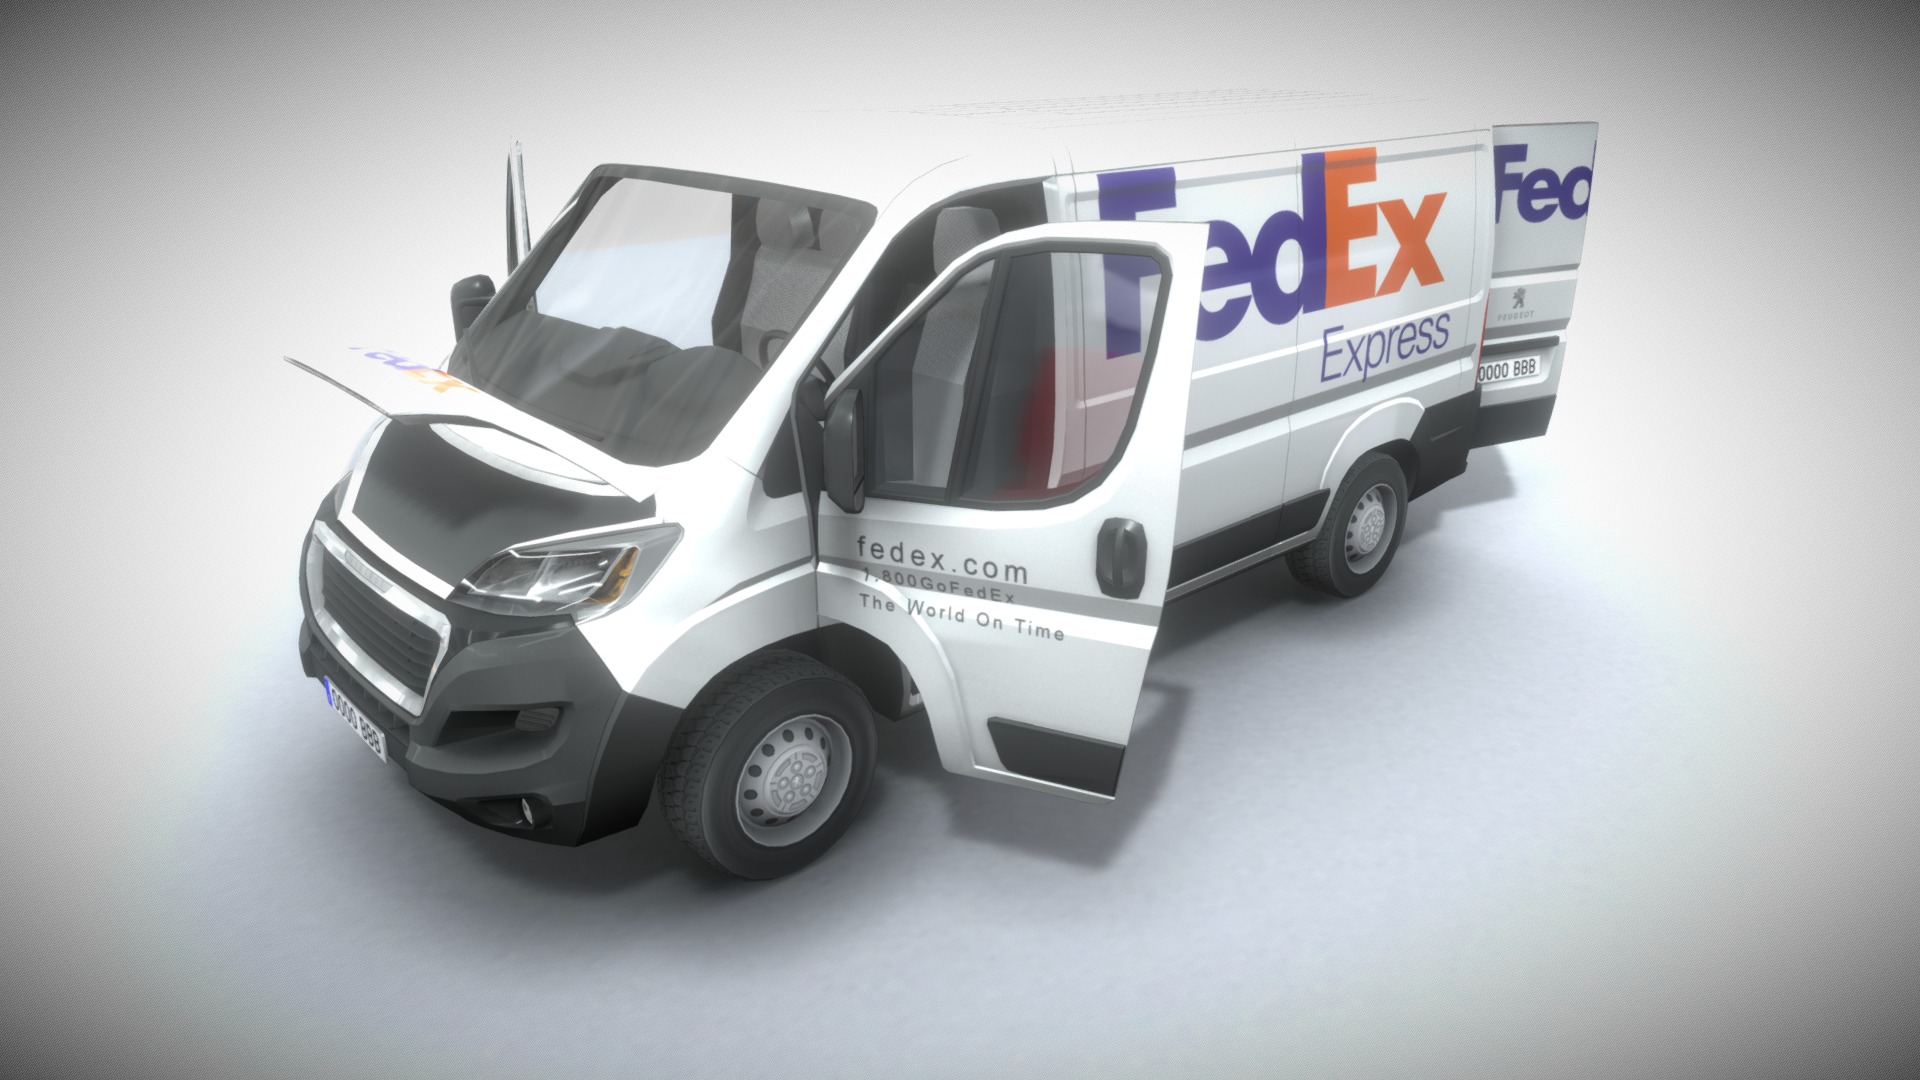 3D model Peugeot Boxer Fedex - This is a 3D model of the Peugeot Boxer Fedex. The 3D model is about a white truck with a blue and red logo.